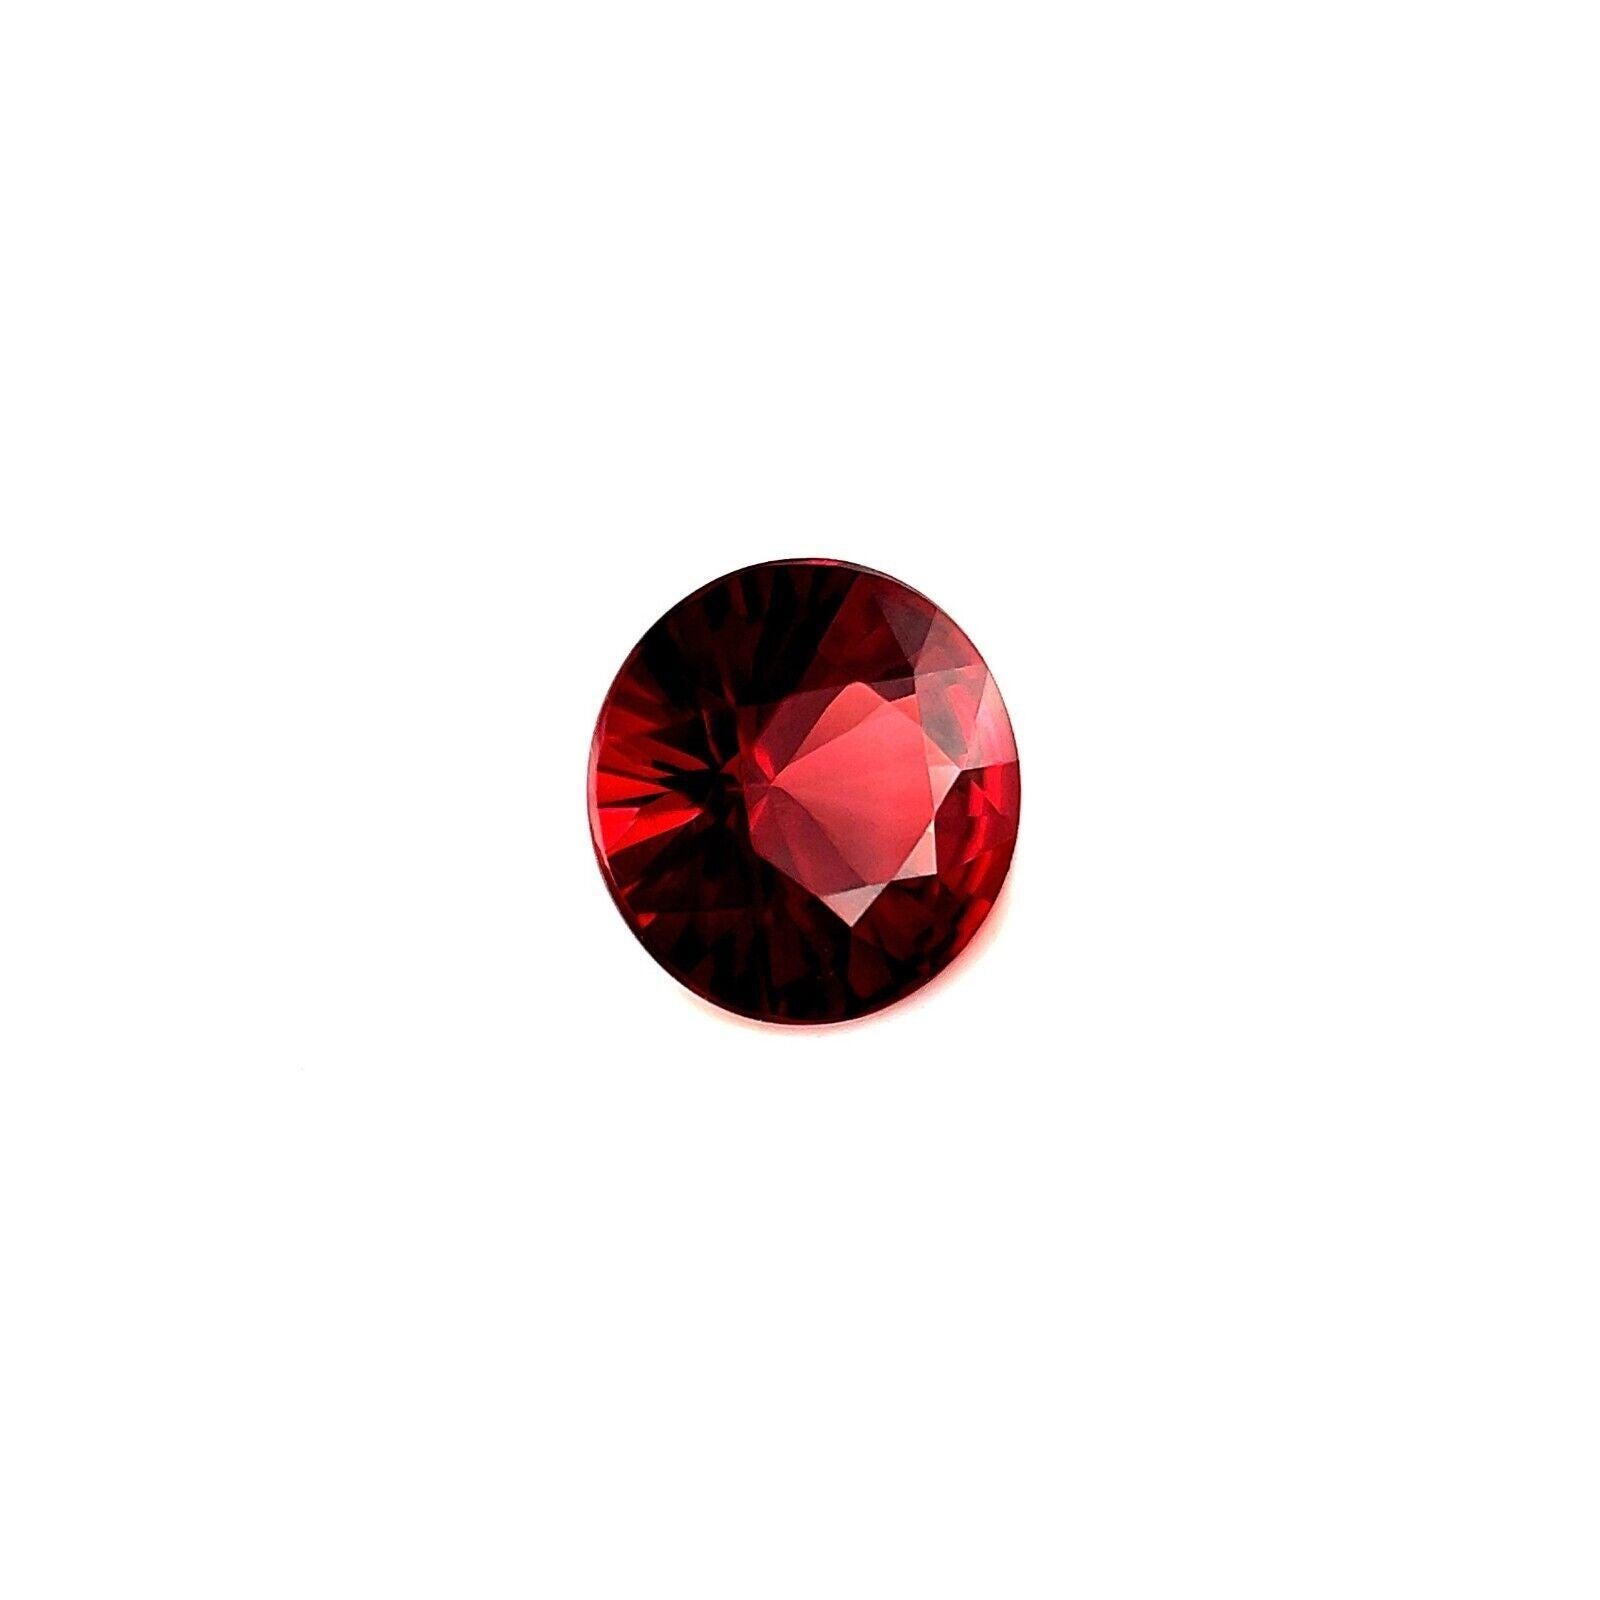 1.89ct Vivid Rhodolite Garnet 7.5mm Red Round Brilliant Diamond Cut Calibrated

Natural 1.89ct Vivid Red Rhodolite Garnet.
Has an an excellent round brilliant cut and very good to excellent clarity, VS. Stone has good polish to show great shine and